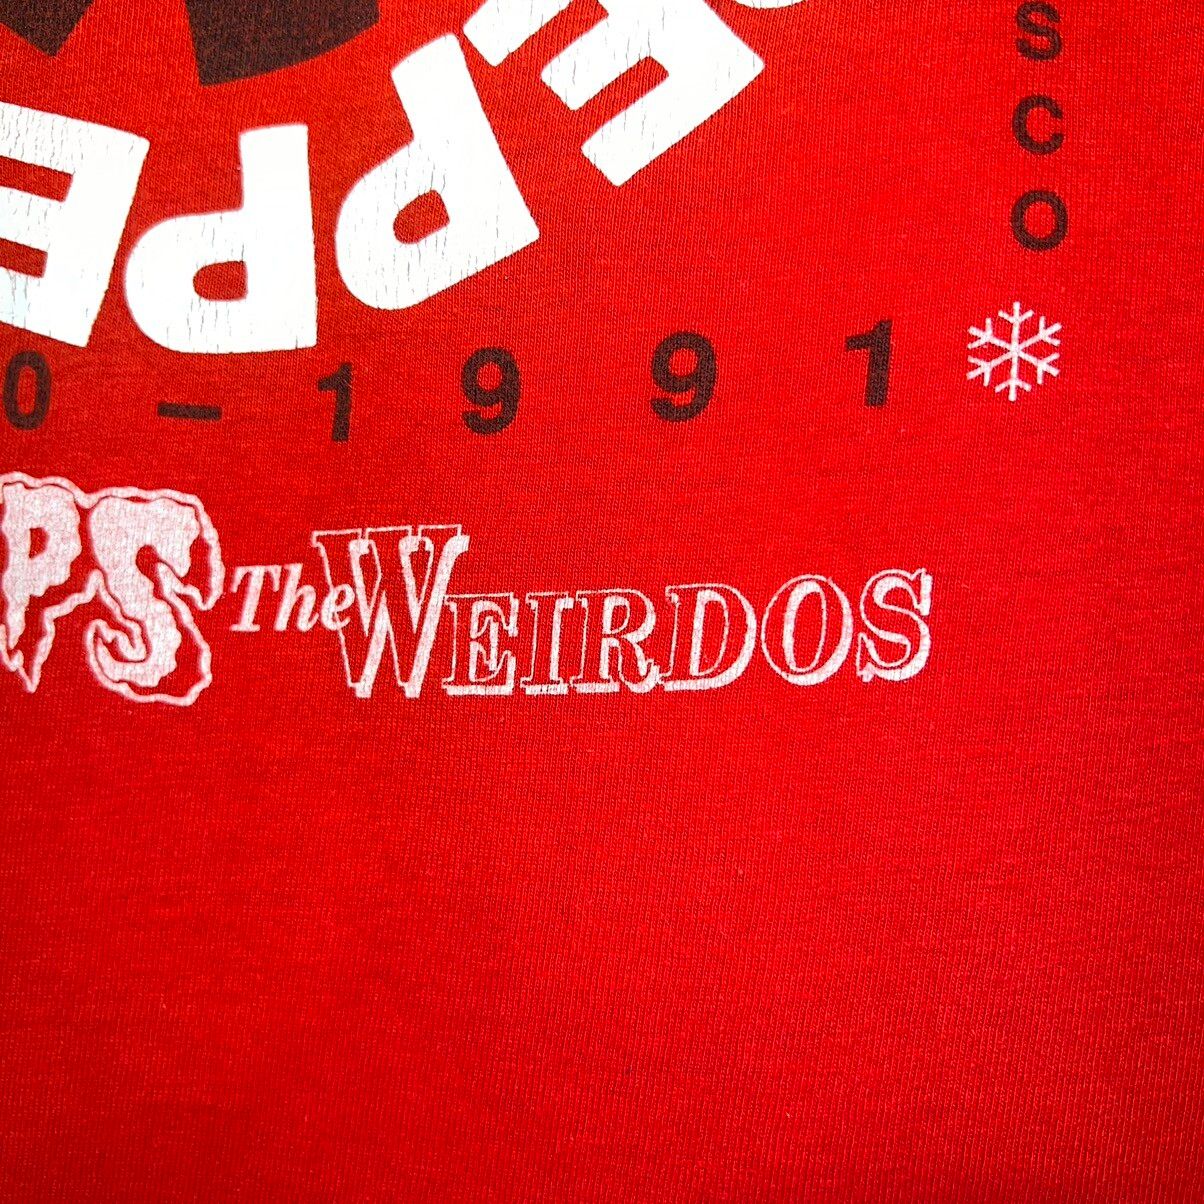 Vintage 1990 Red Hot Chili Peppers ft The Cramps & Weirdos Staff Tee Size US XL / EU 56 / 4 - 6 Thumbnail